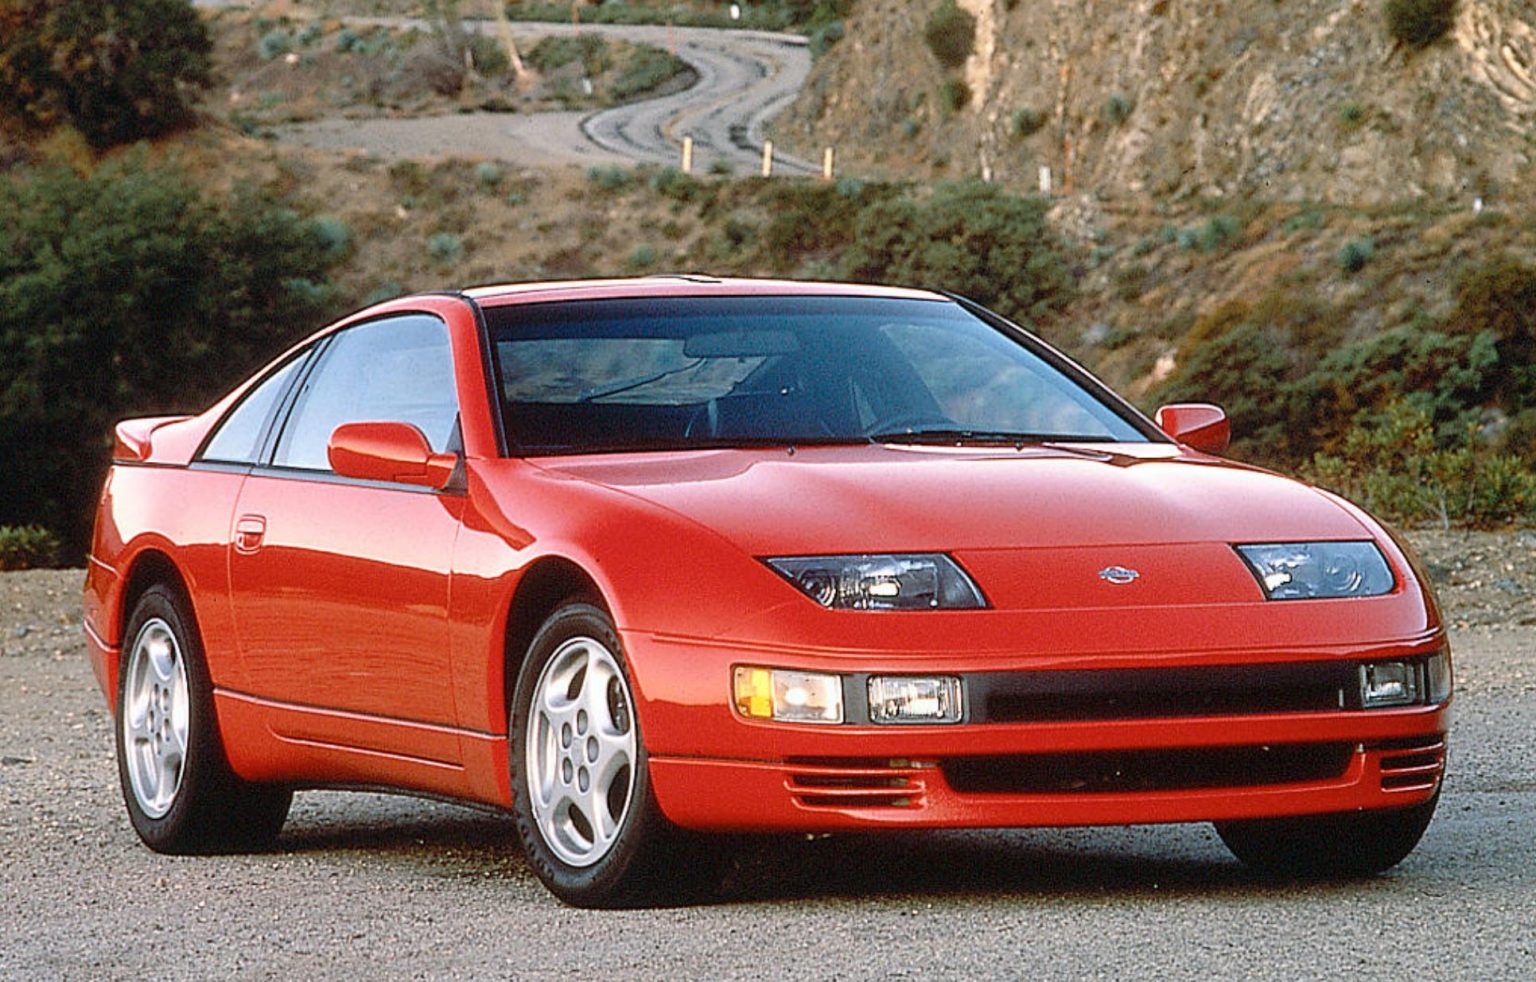 How Much Did The Nissan 300ZX Z32 Cost New? - Garage Dreams